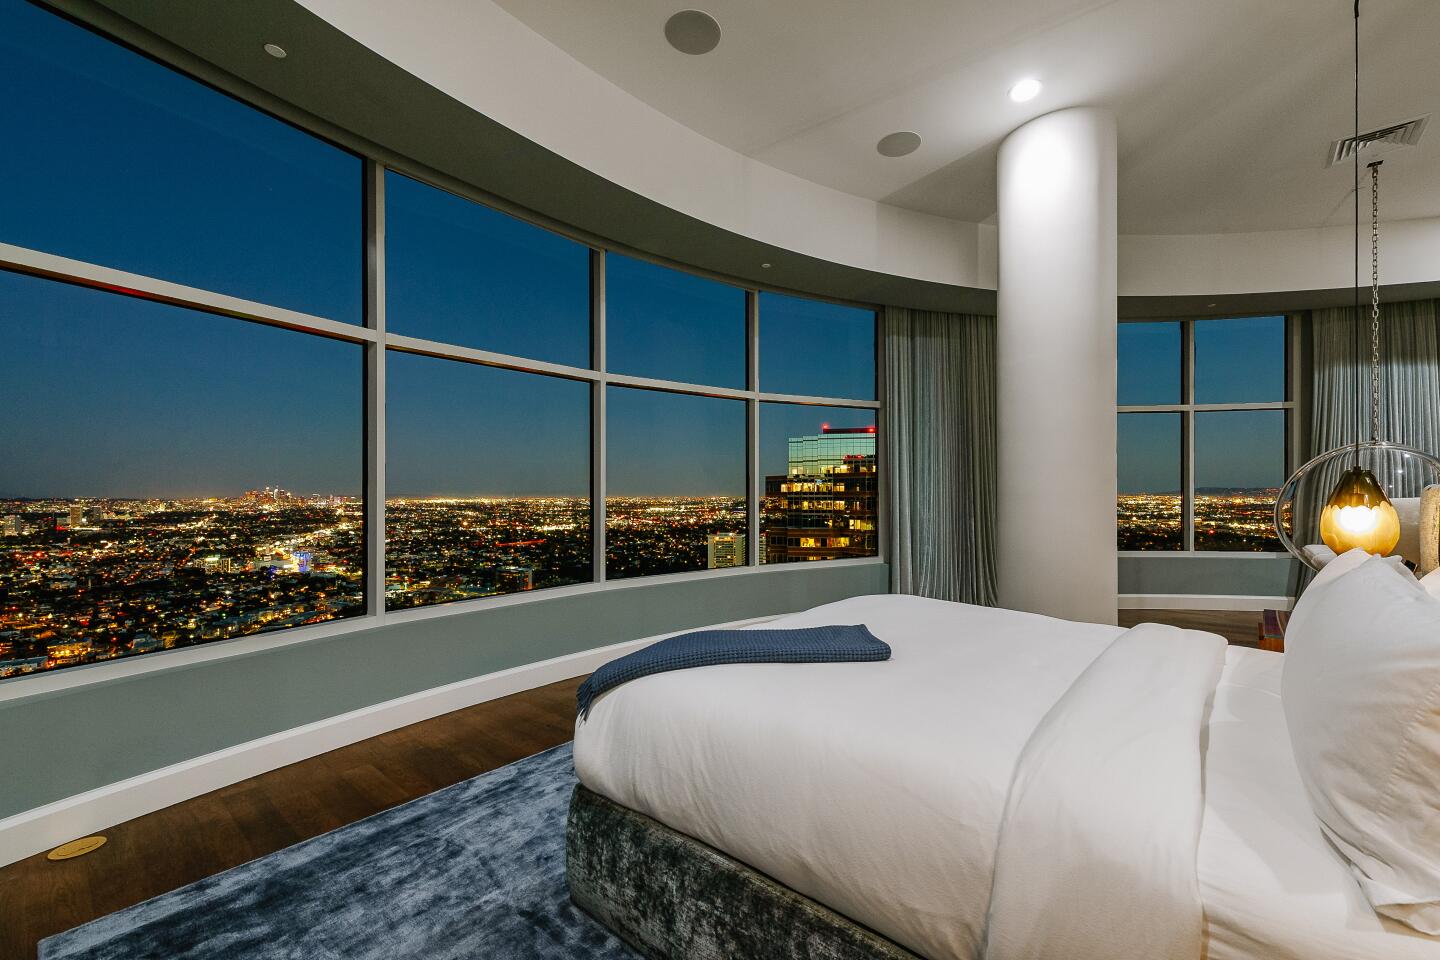 A bed is surrounded by large windows.